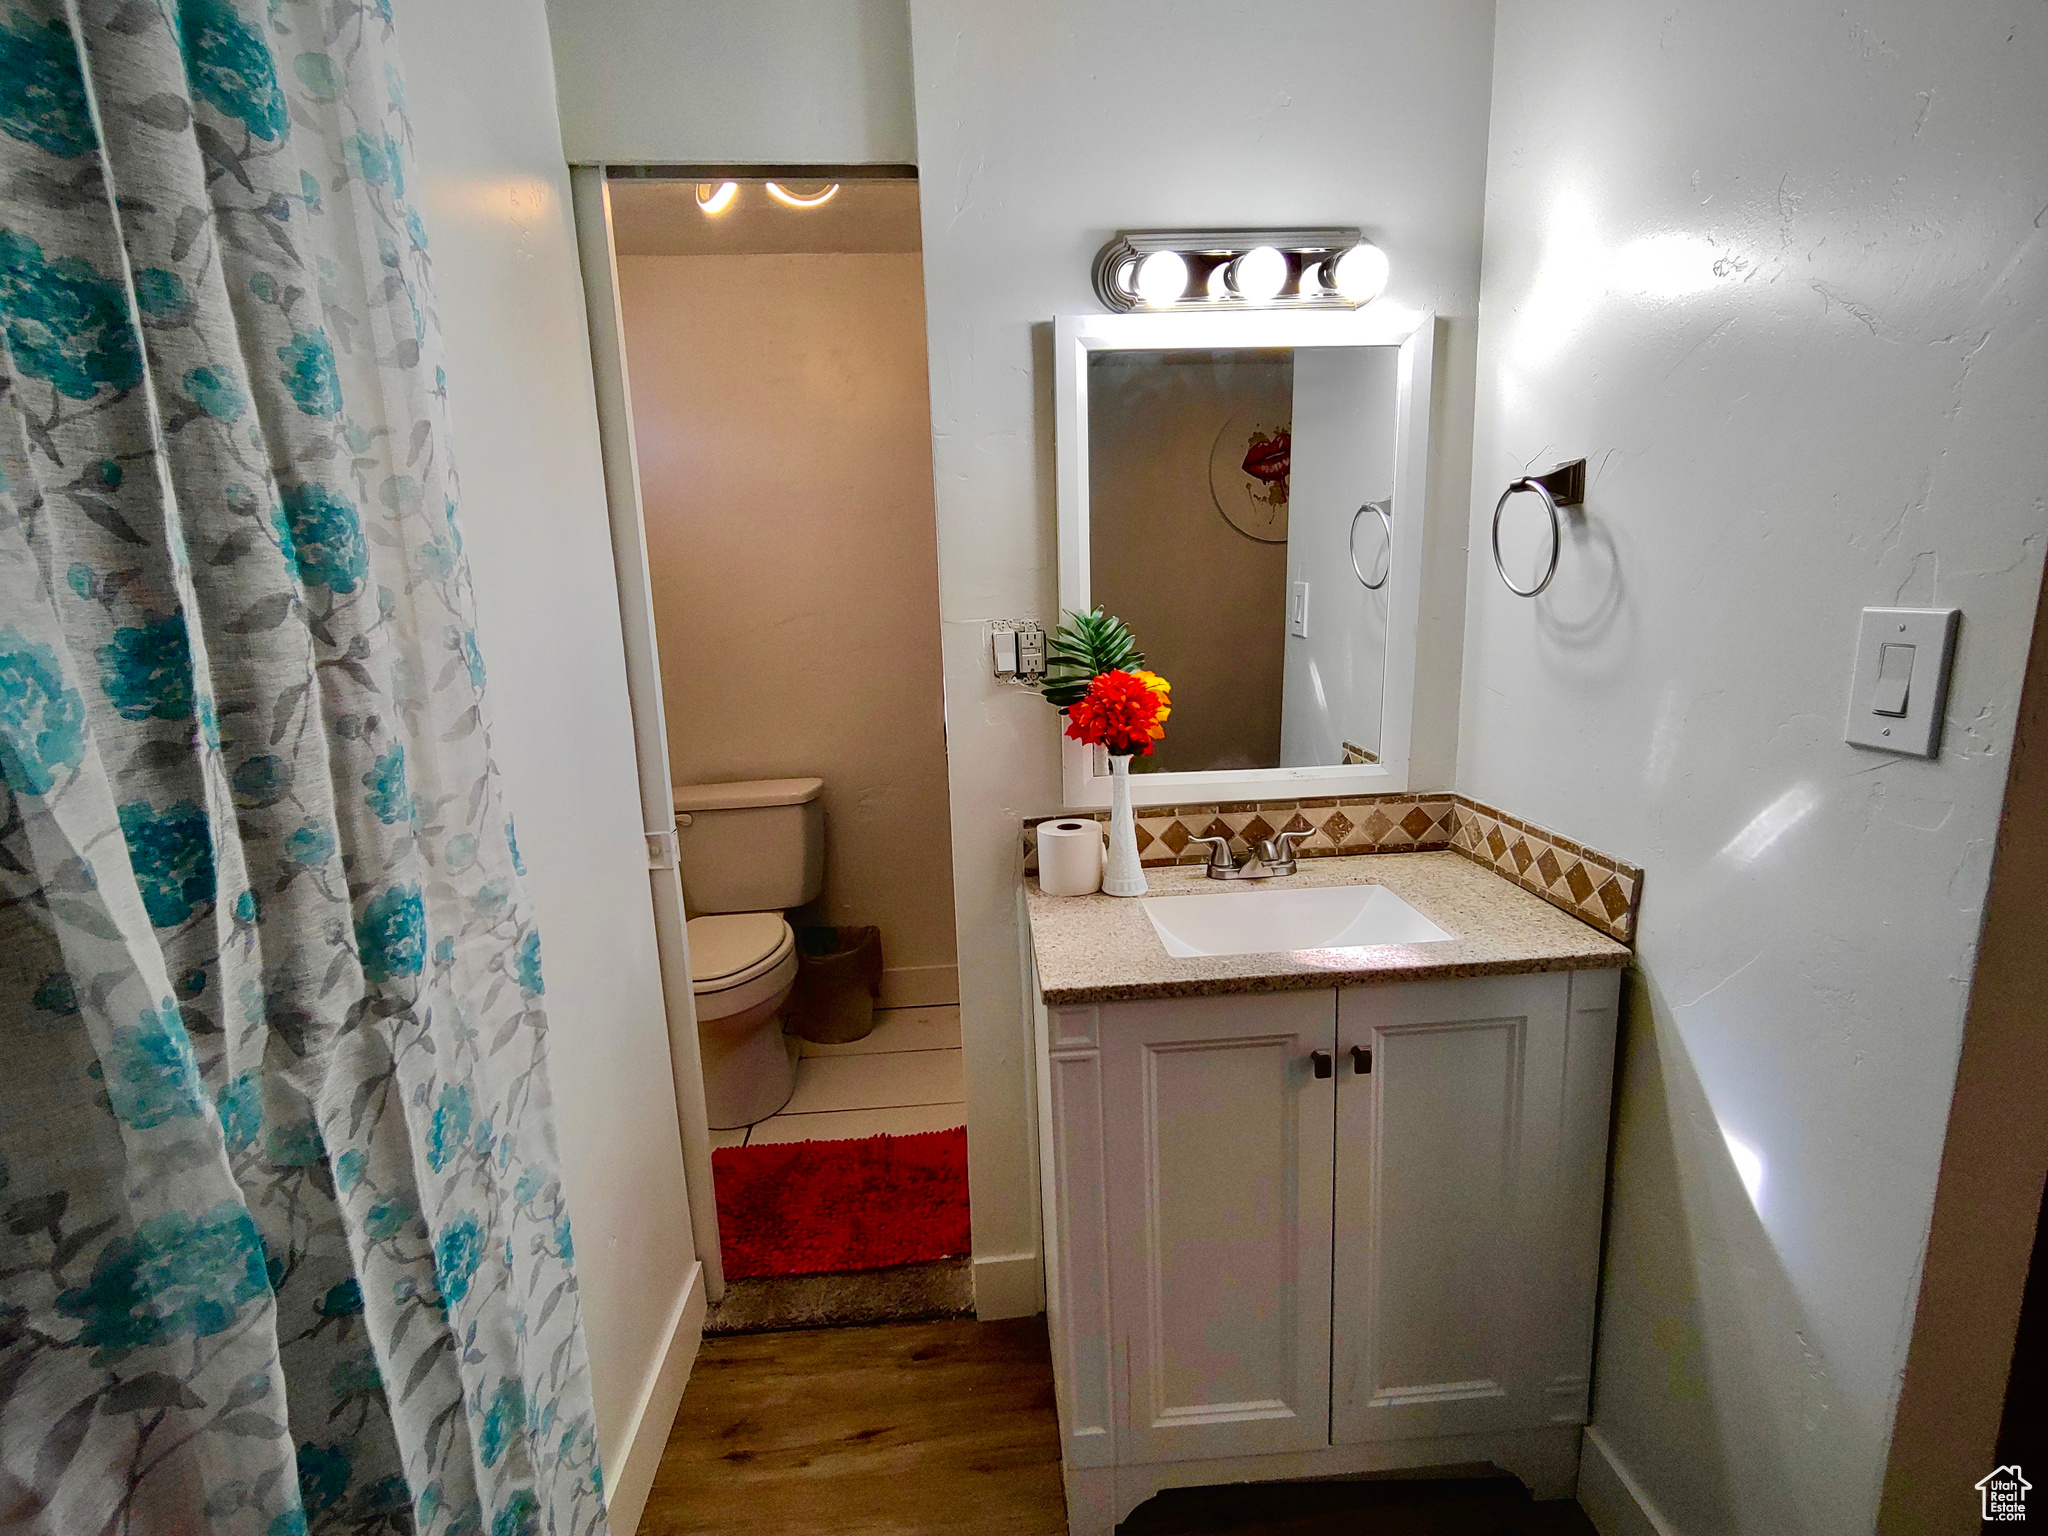 Bathroom with wood-type flooring, toilet, vanity with extensive cabinet space, and backsplash